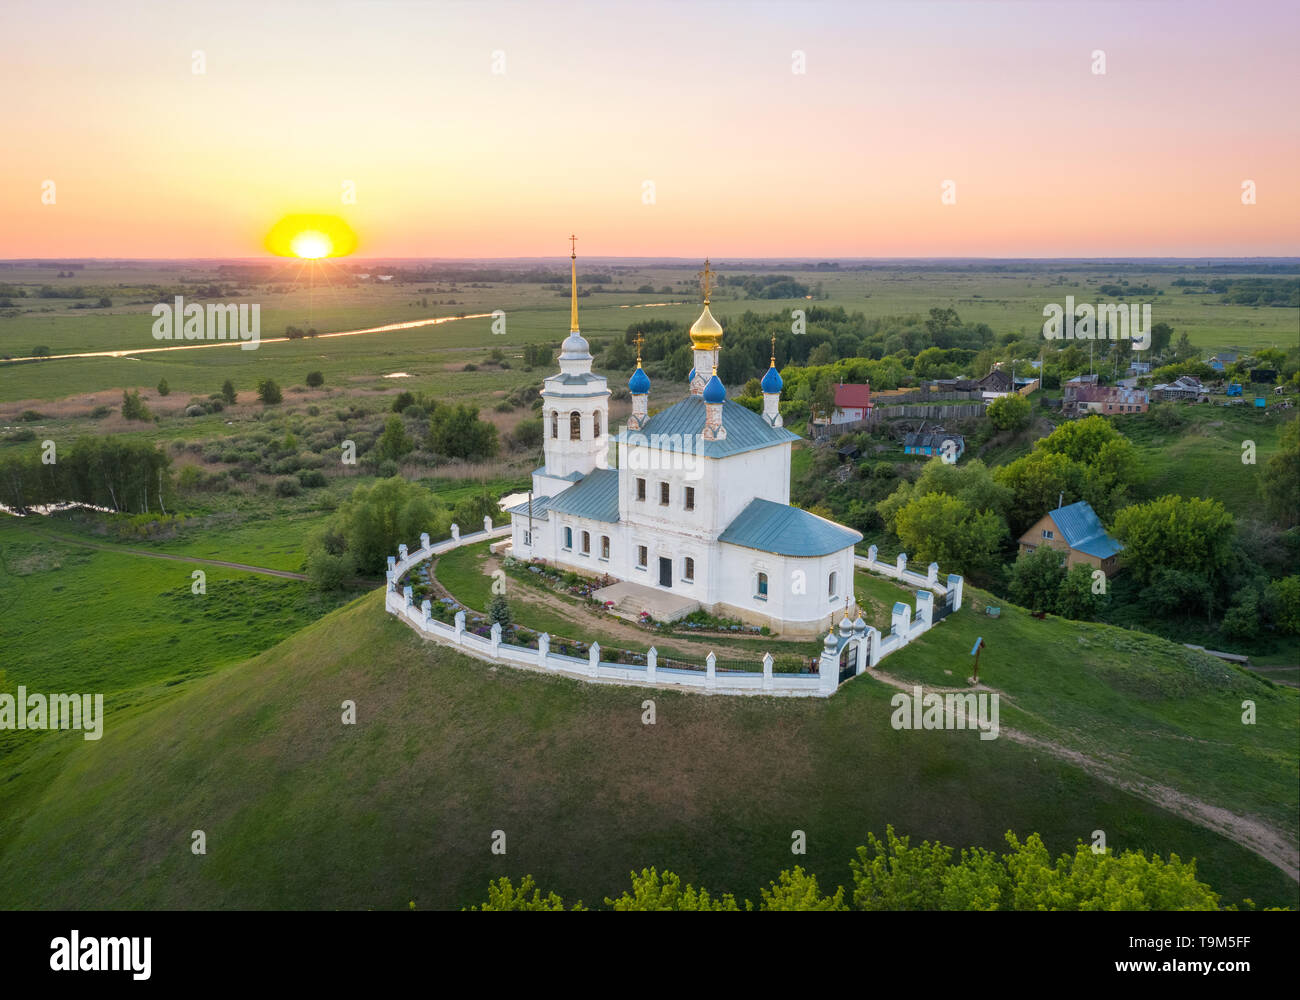 Yepifan, Tula oblast, Russia. Aerial view of Church of the Assumption located on the mound which is the burial place of warriors killed in the Battle  Stock Photo